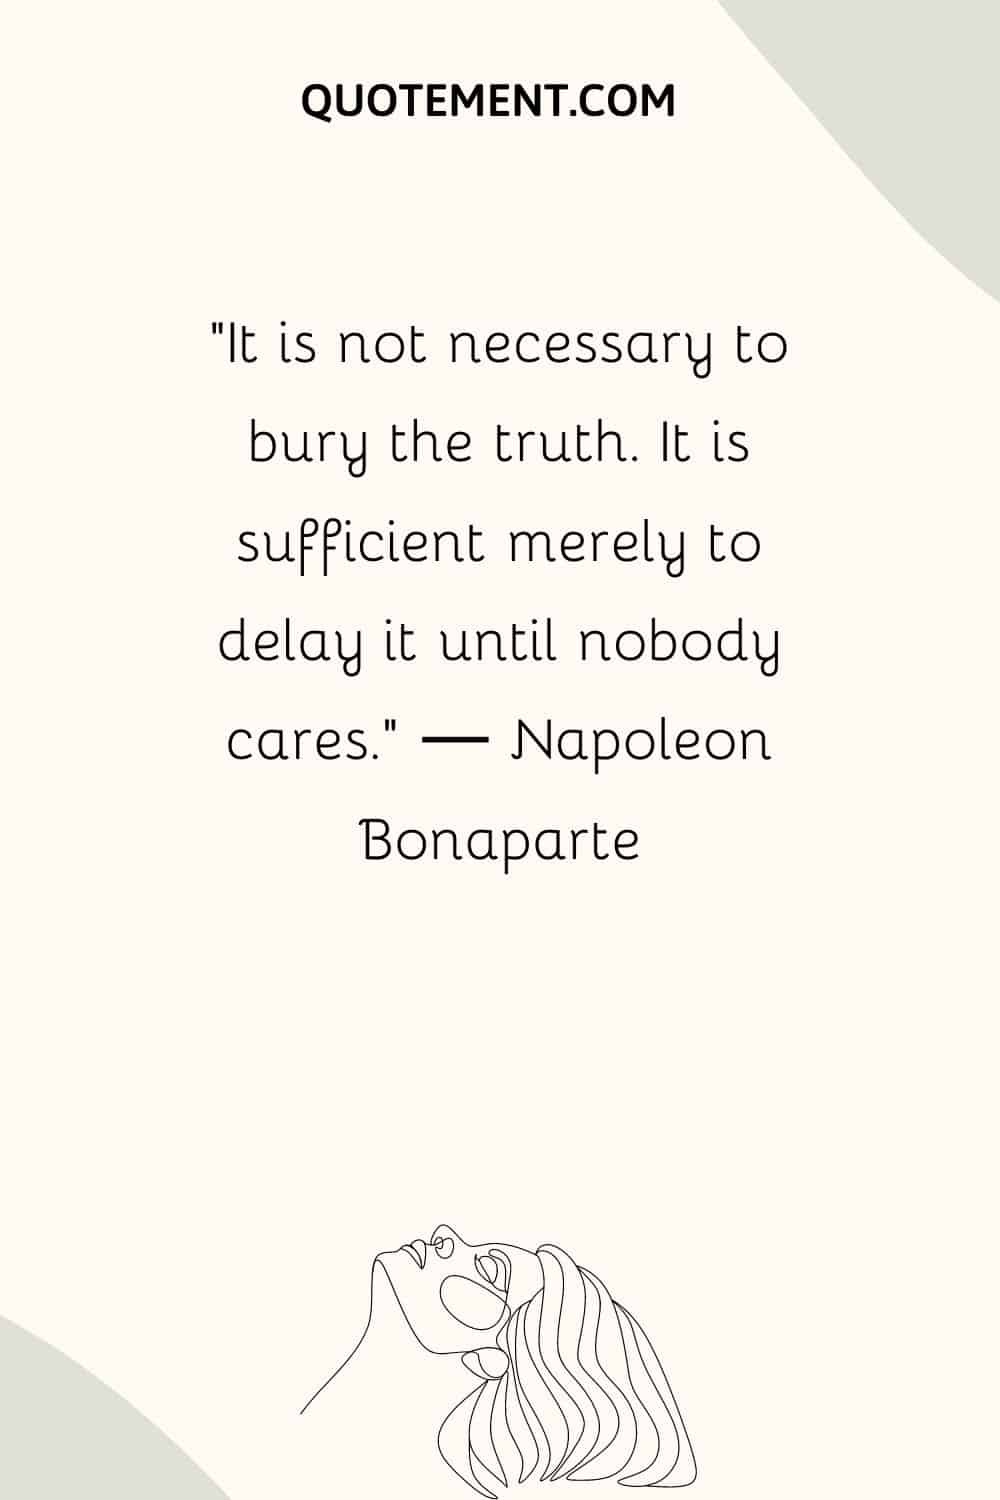 It is not necessary to bury the truth. It is sufficient merely to delay it until nobody cares.